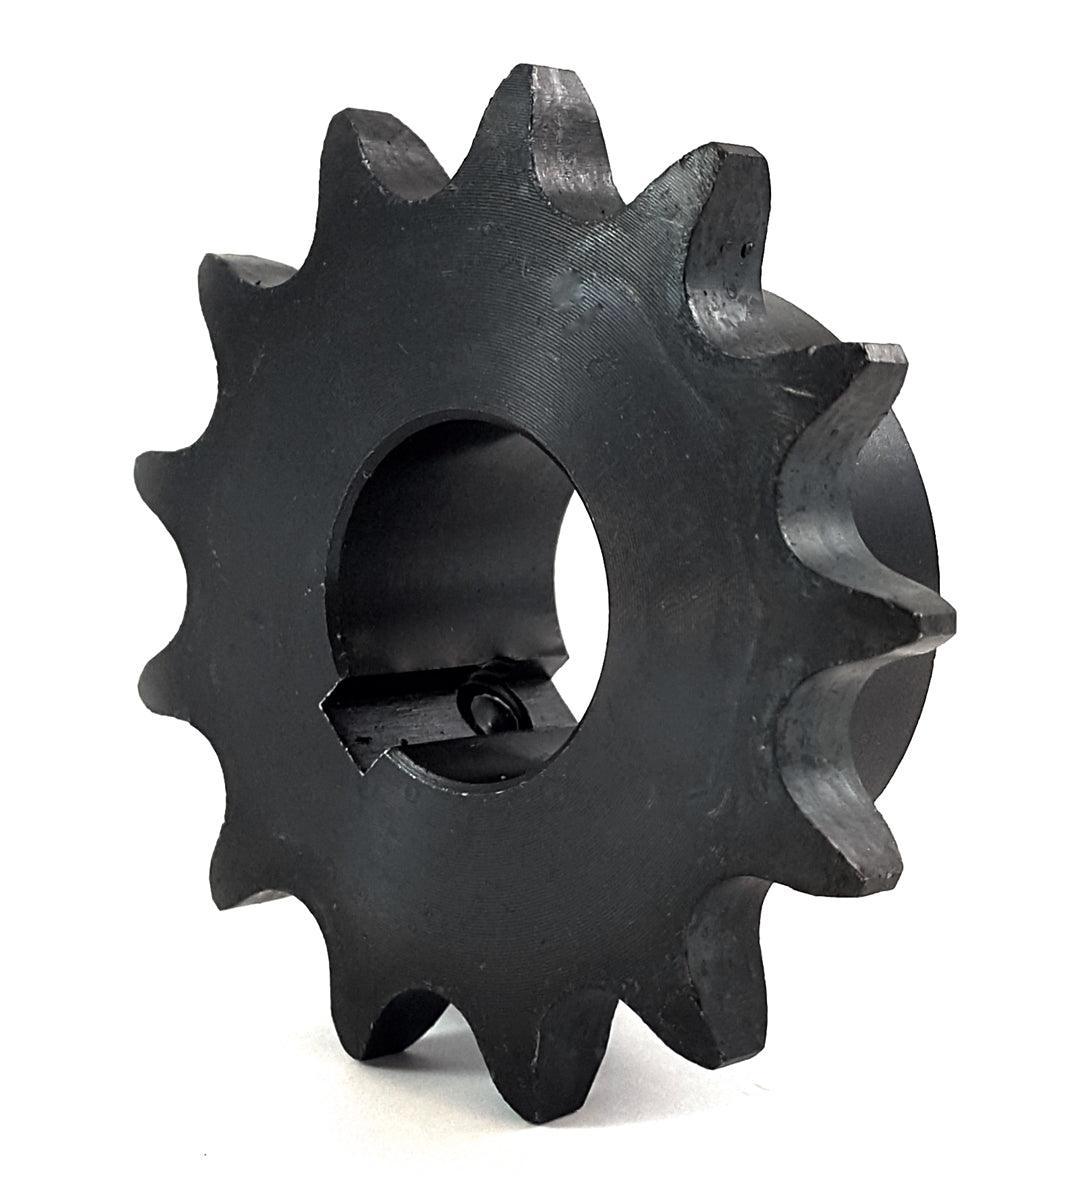 40B12-7/8" Finished Bore Sprocket With Keyway | 40FB12H-7/8 - Forces Inc